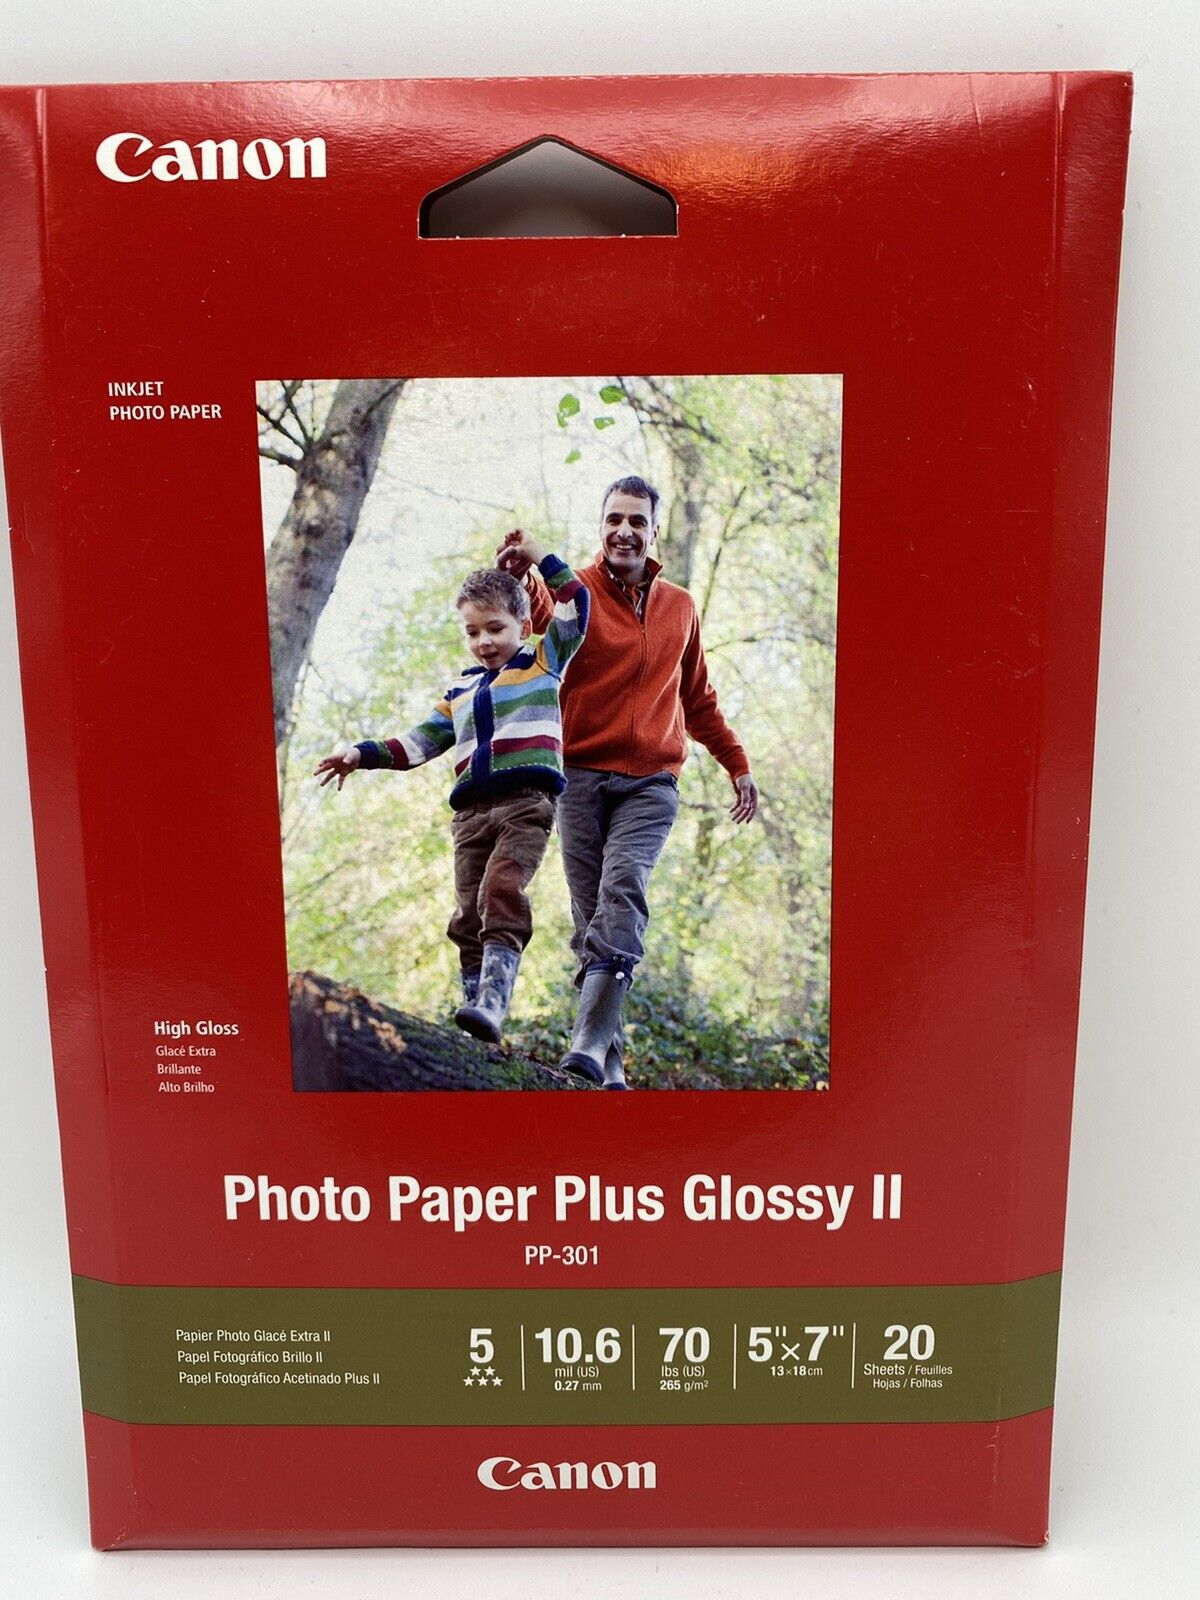 Canon Photo Paper Plus II Glossy 5x7 High Gloss 20 sheets, 10.6 mil, New sealed